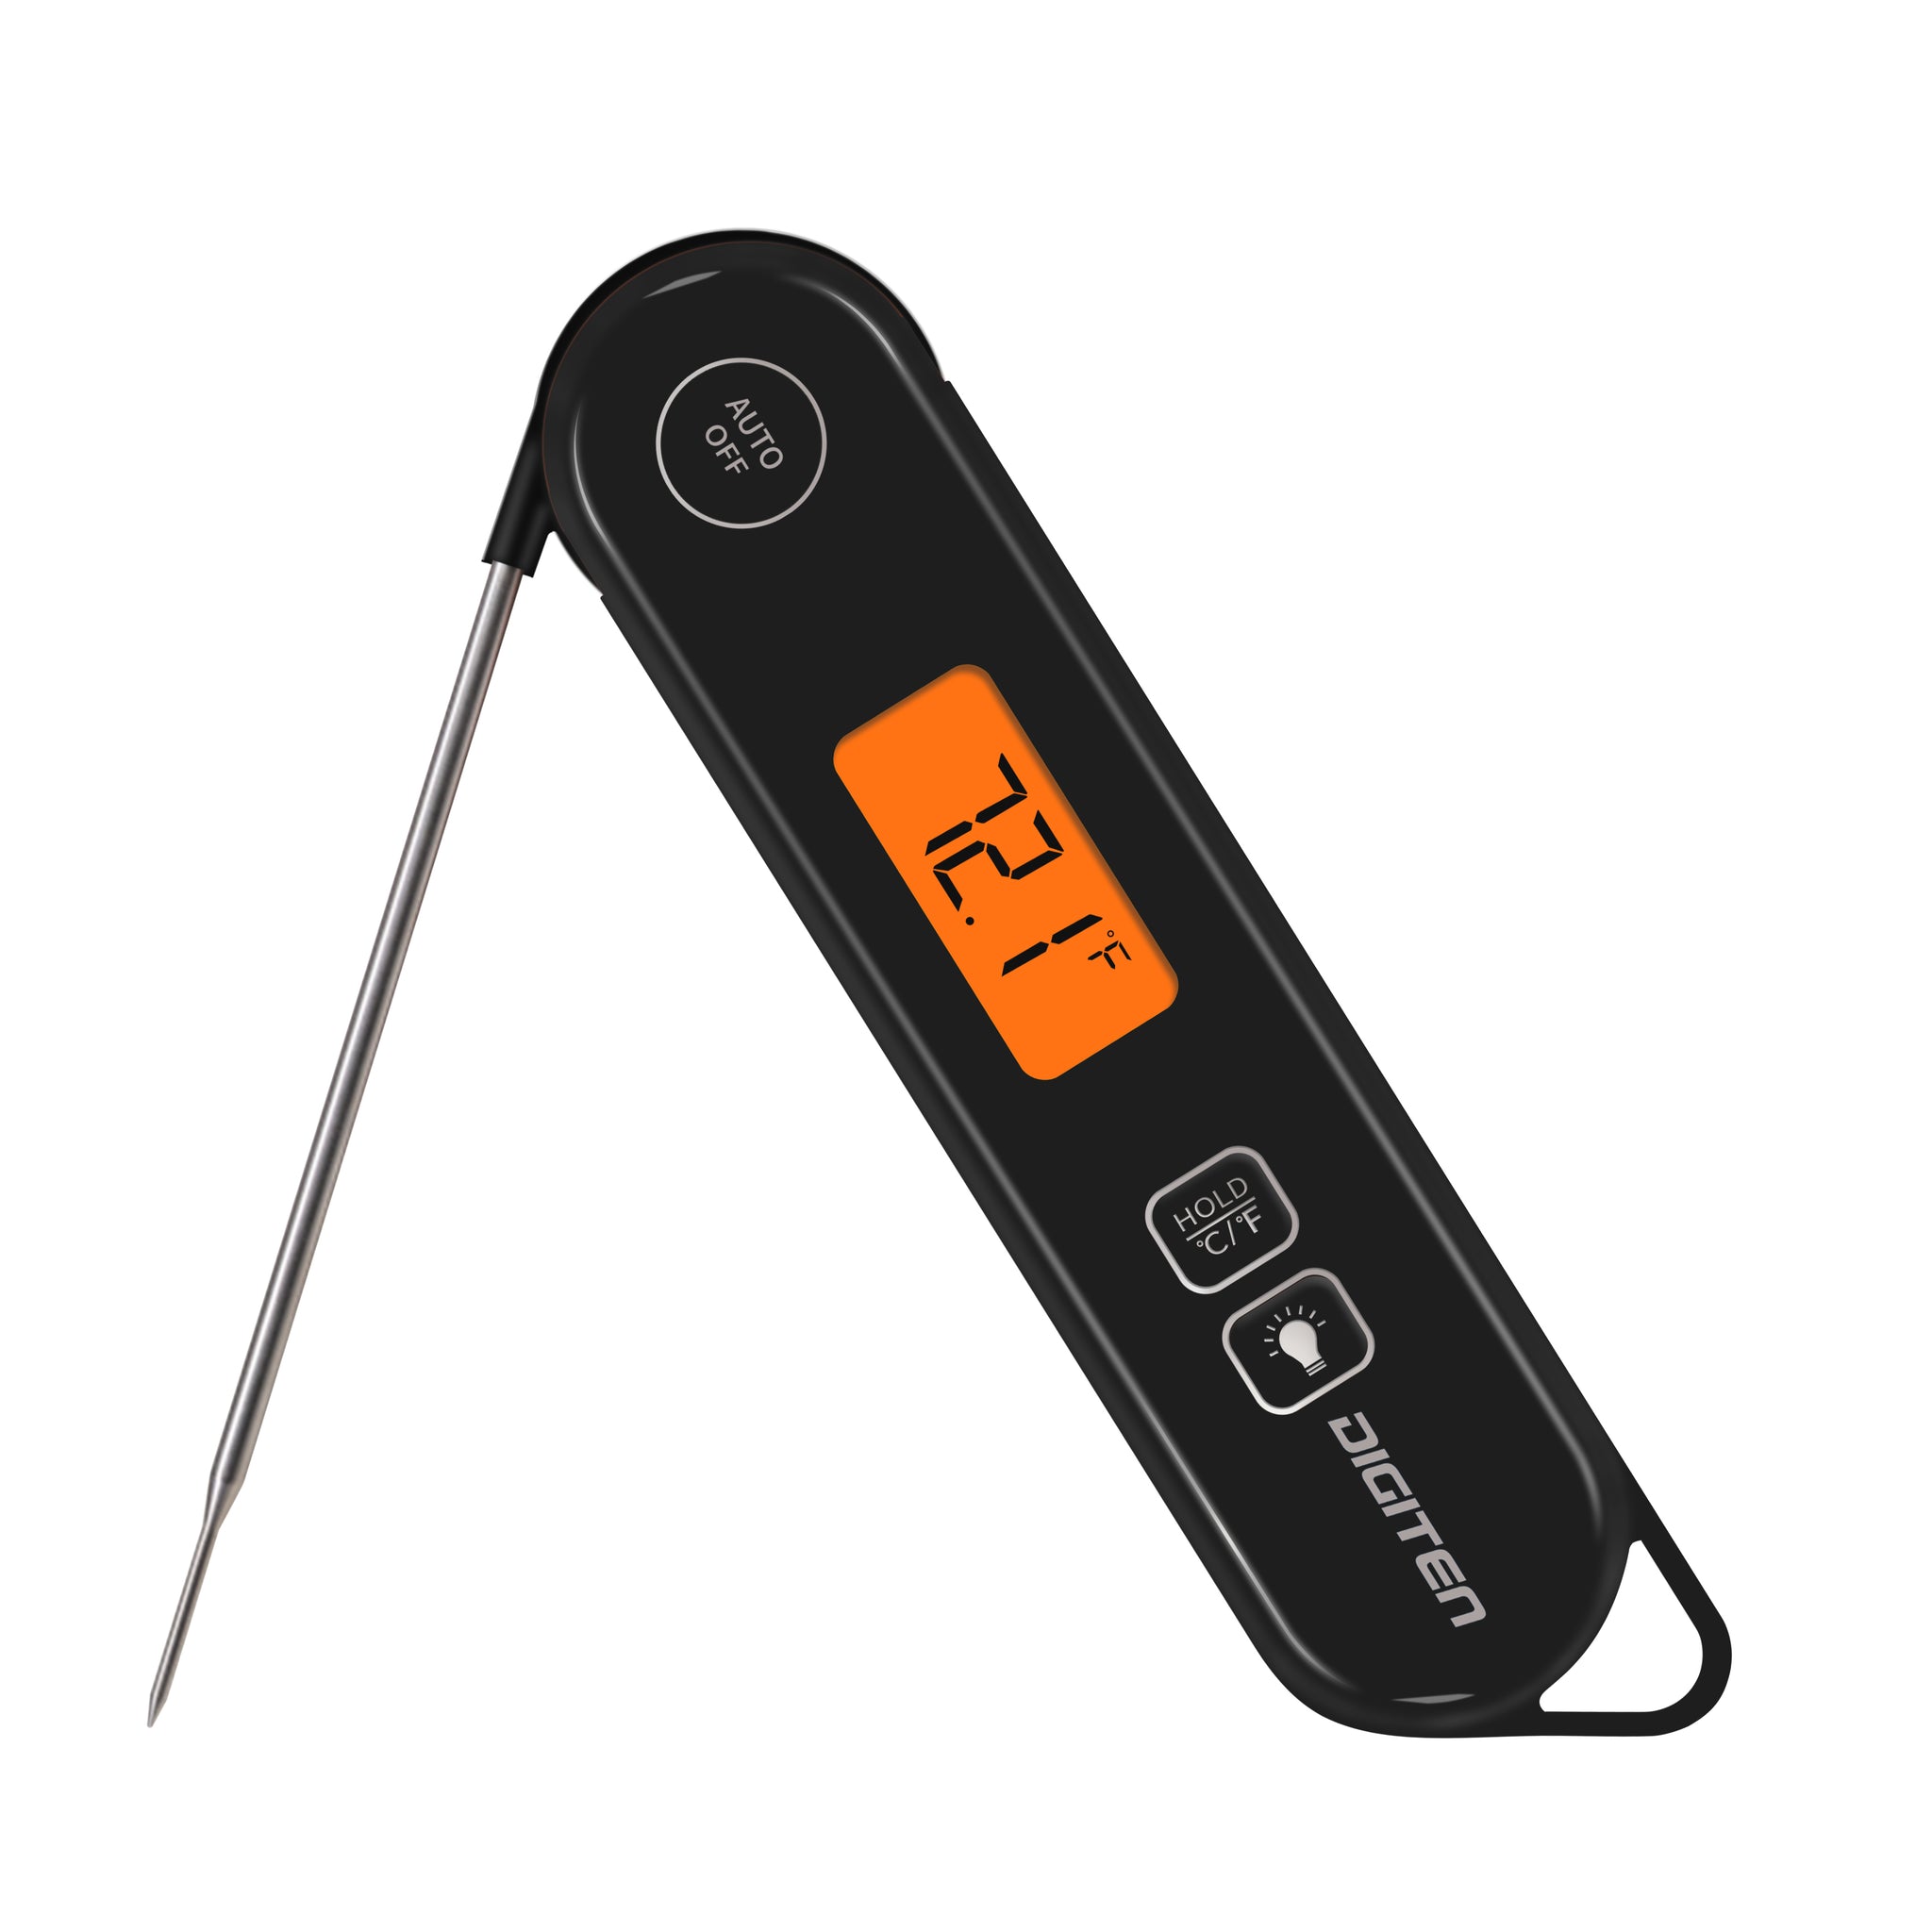 Instant-Read Thermometer